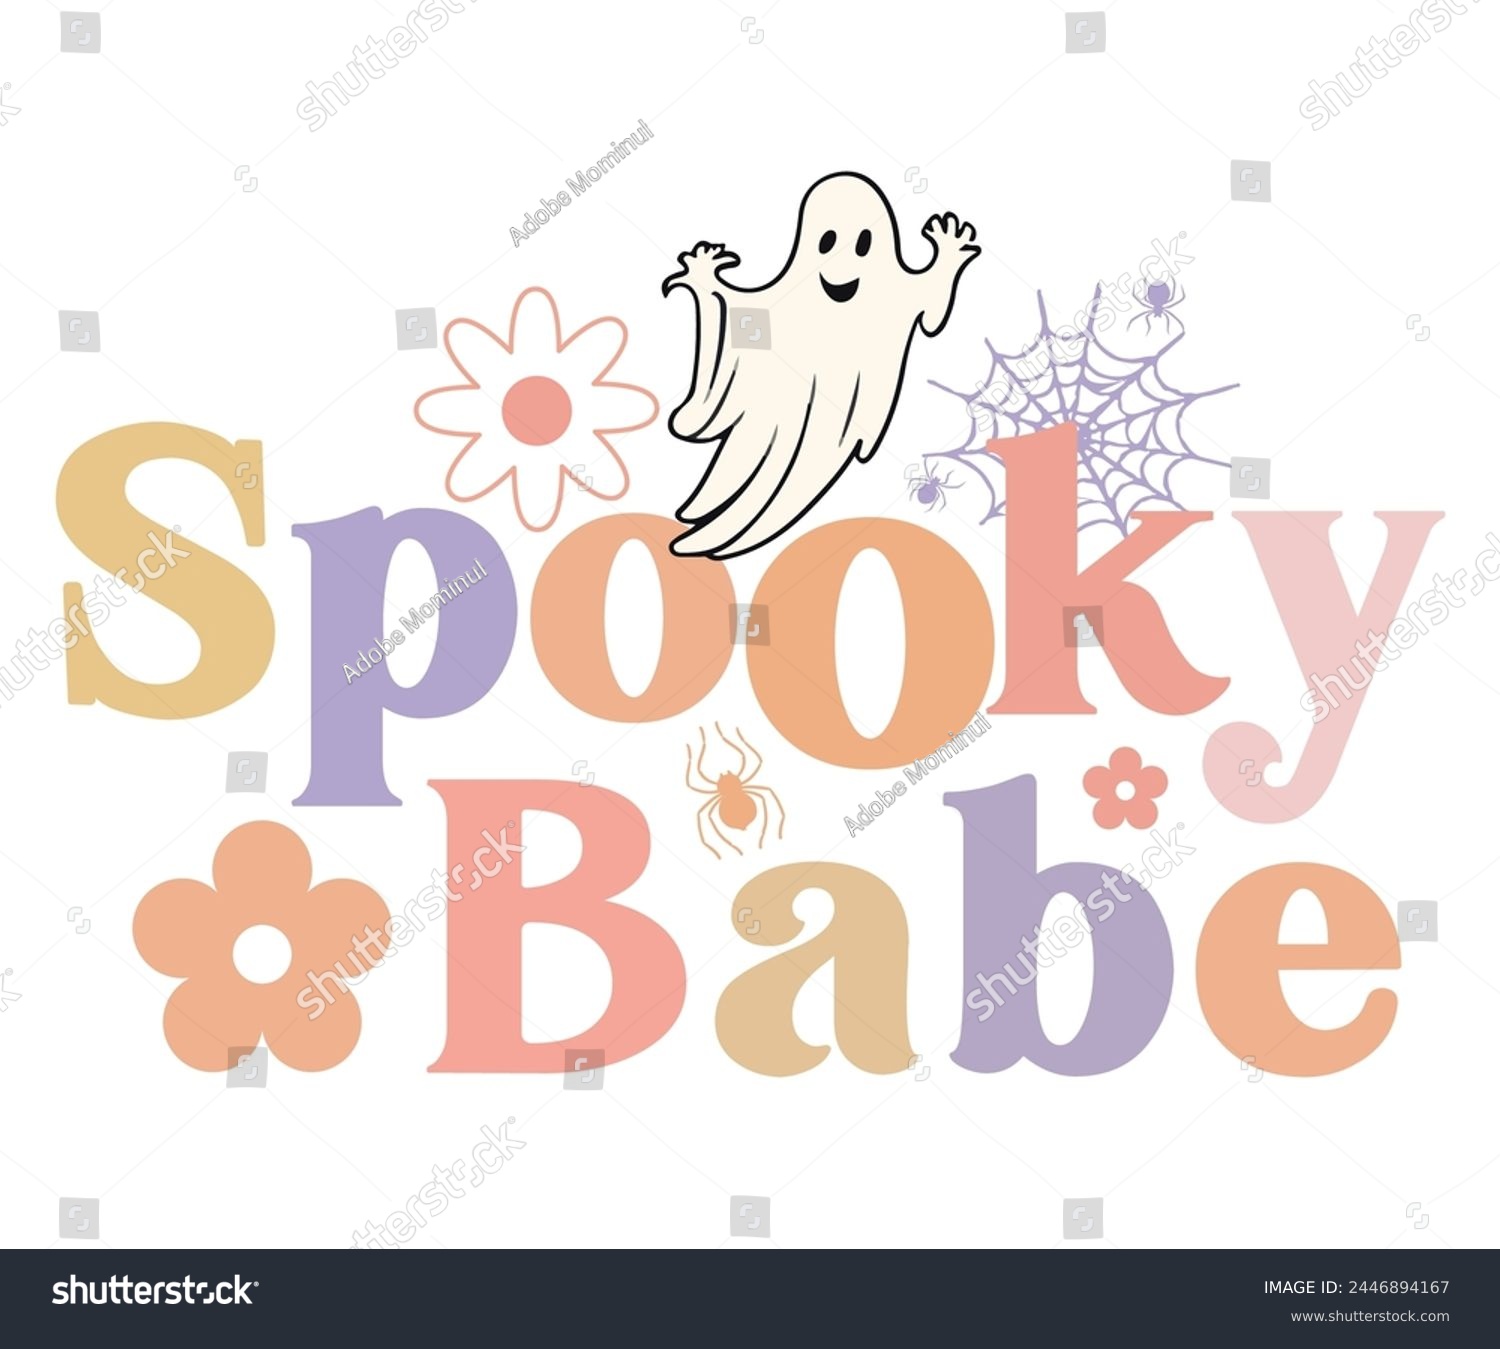 SVG of Spooky Babe Retro,Halloween Svg,Typography,Halloween Quotes,Witches Svg,Halloween Party,Halloween Costume,Halloween Gift,Funny Halloween,Spooky Svg,Funny T shirt,Ghost Svg,Cut file svg